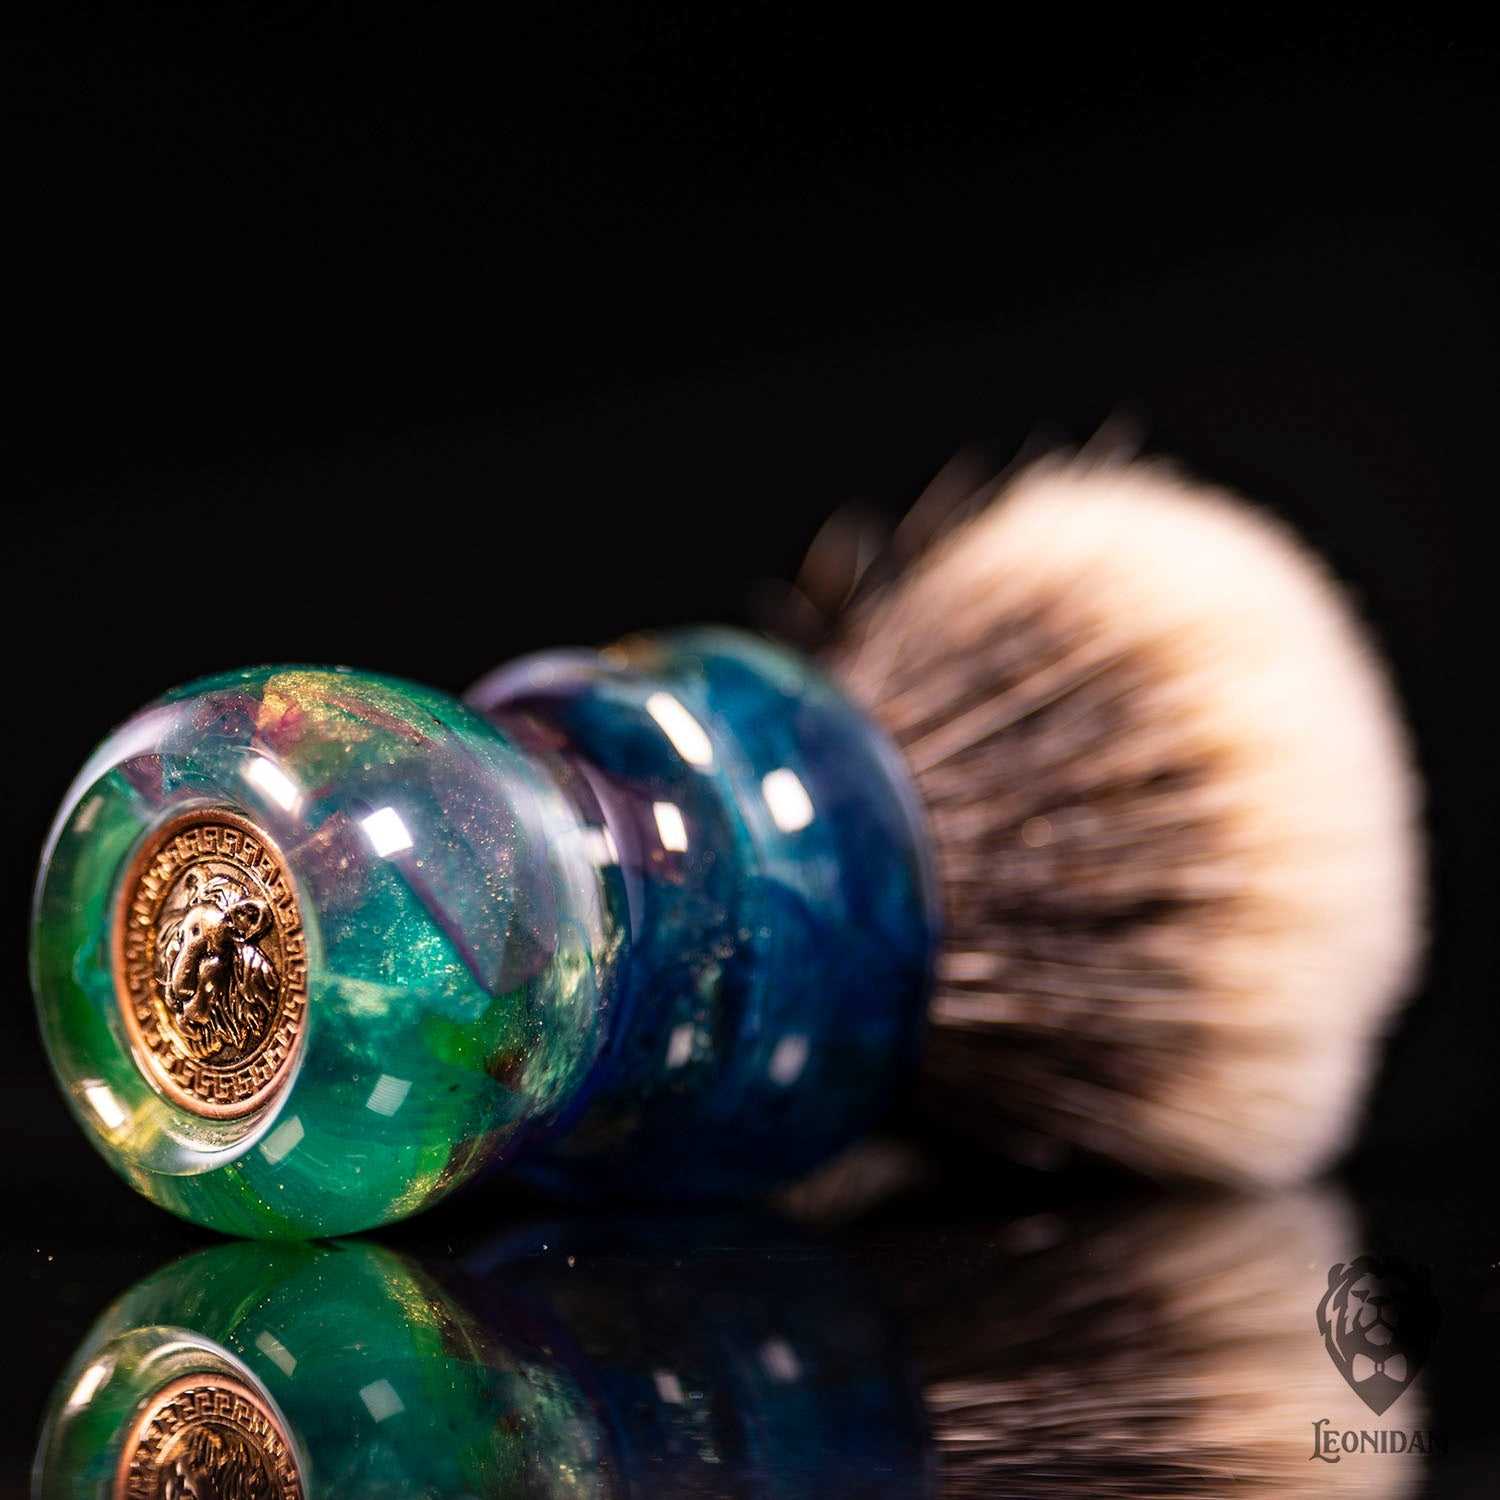 Handmade shaving brush "Dolce Vita", with mixed colorful resin handle.